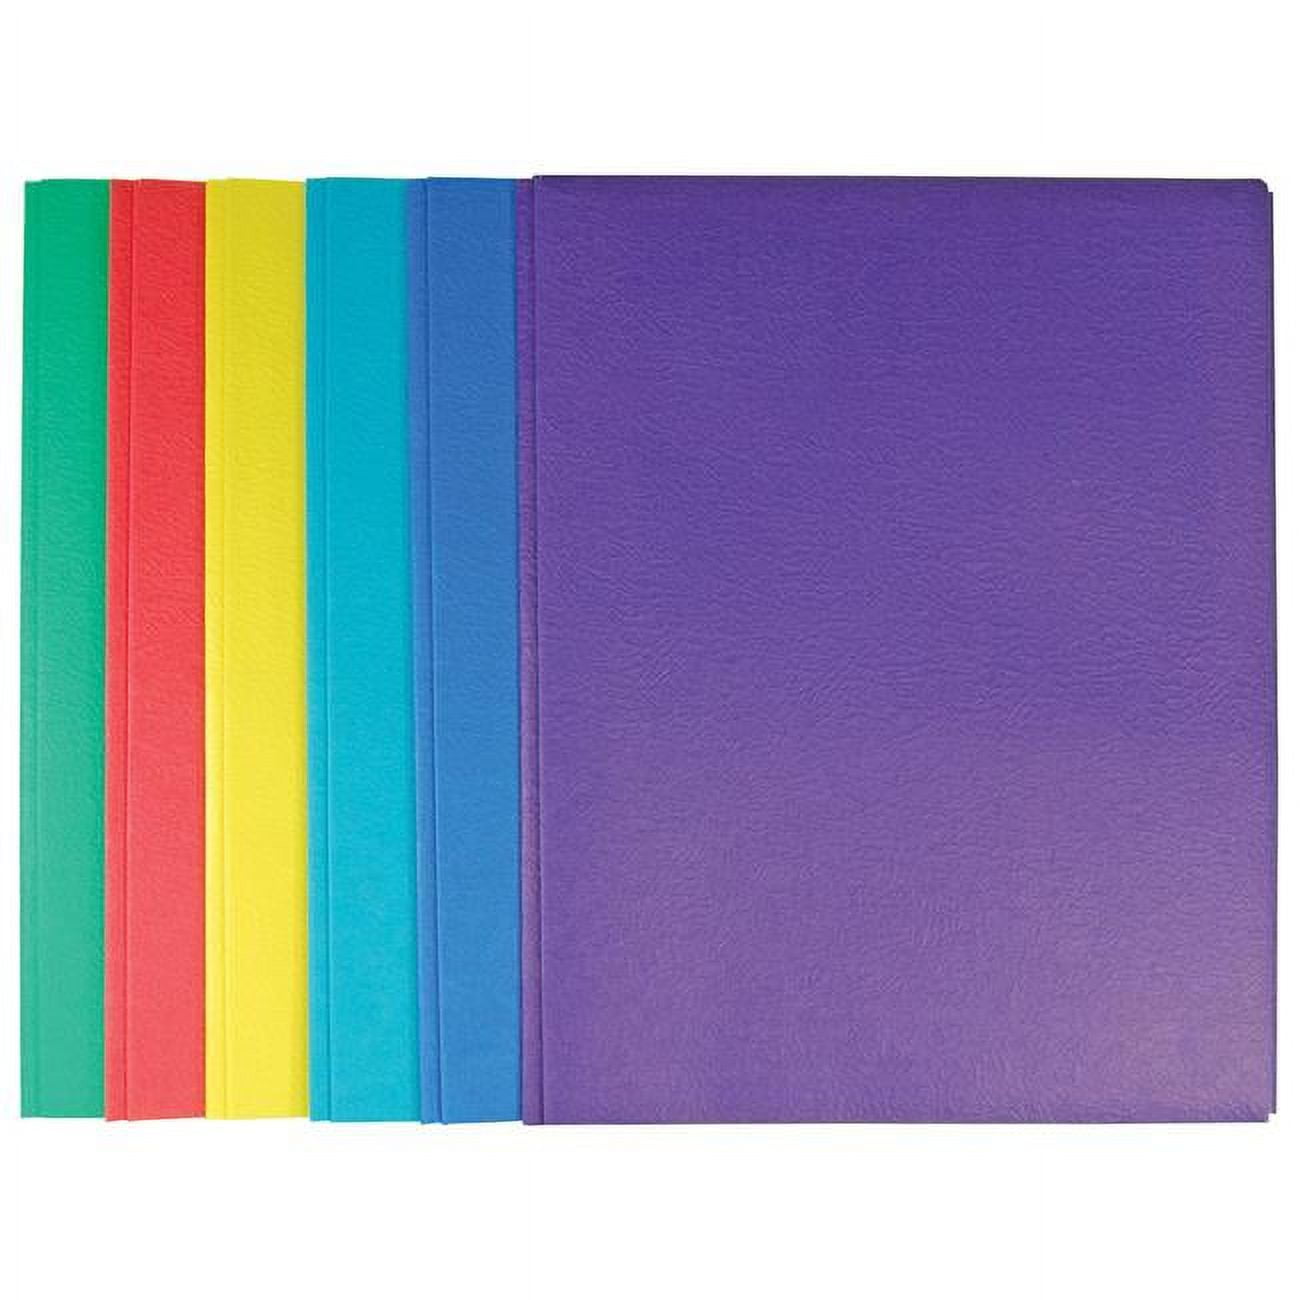 2315180 11.5 X 9.375 In. Ddi 2 Pocket Paper Portfolio With Tangs - Case Of 100